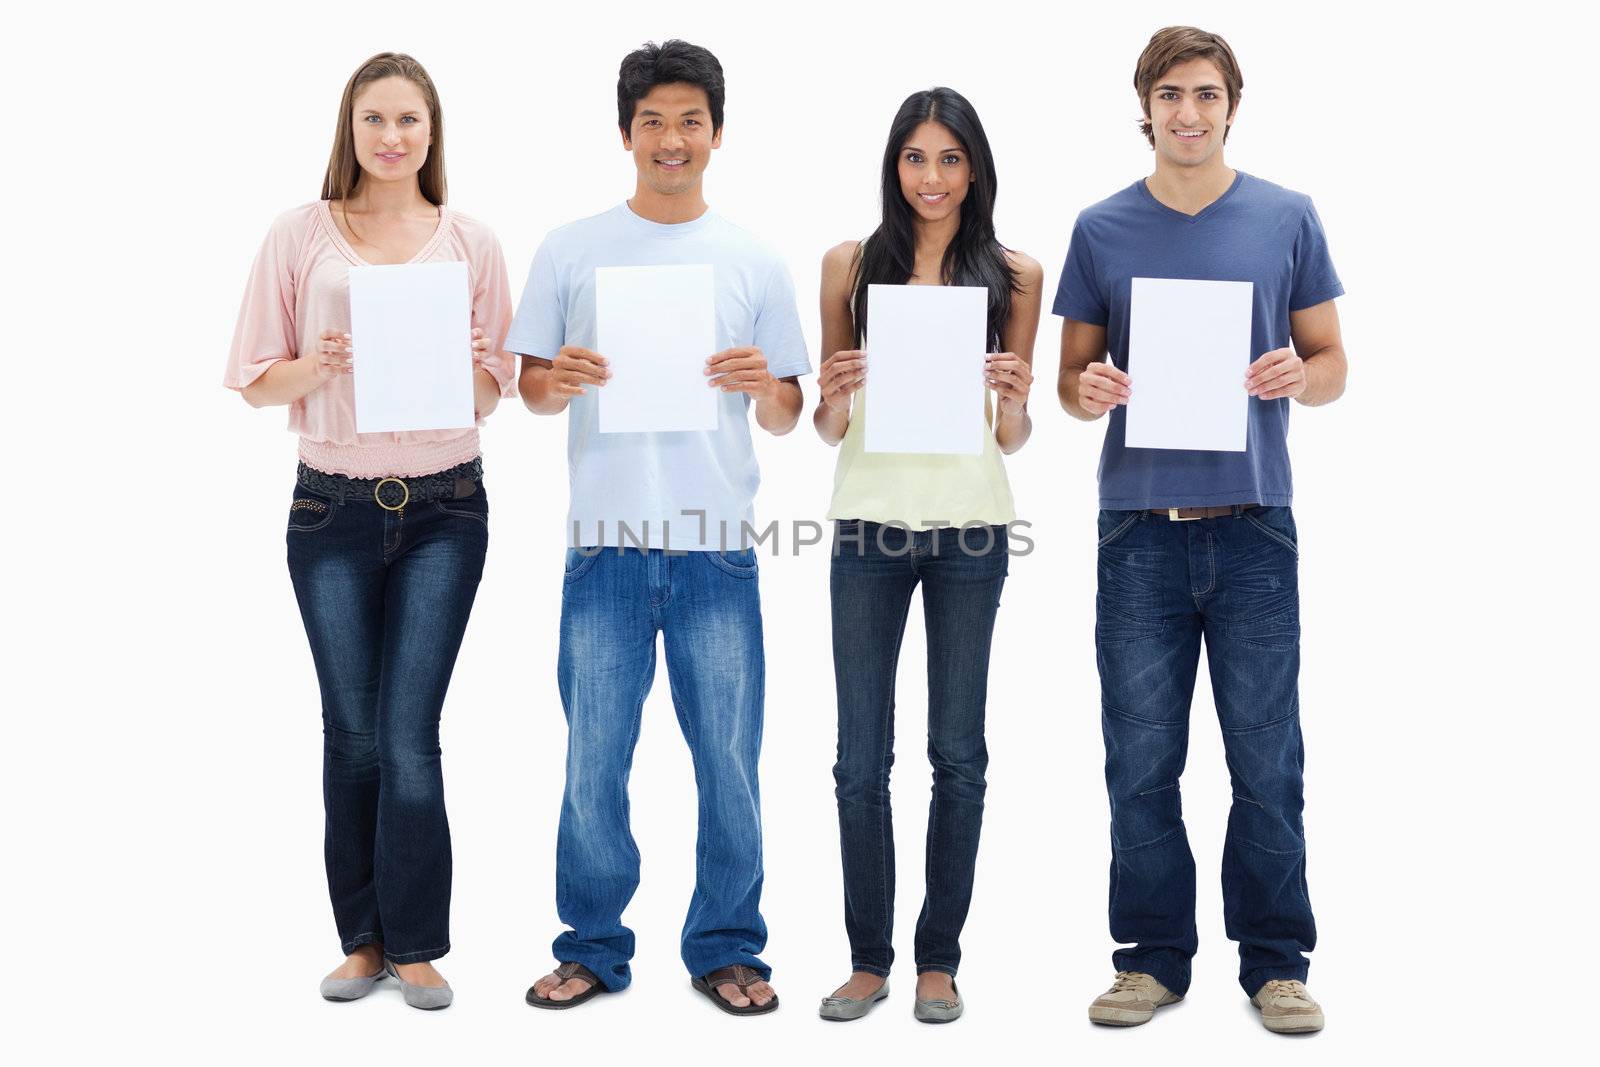 Four people in jeans holding four signs against white background